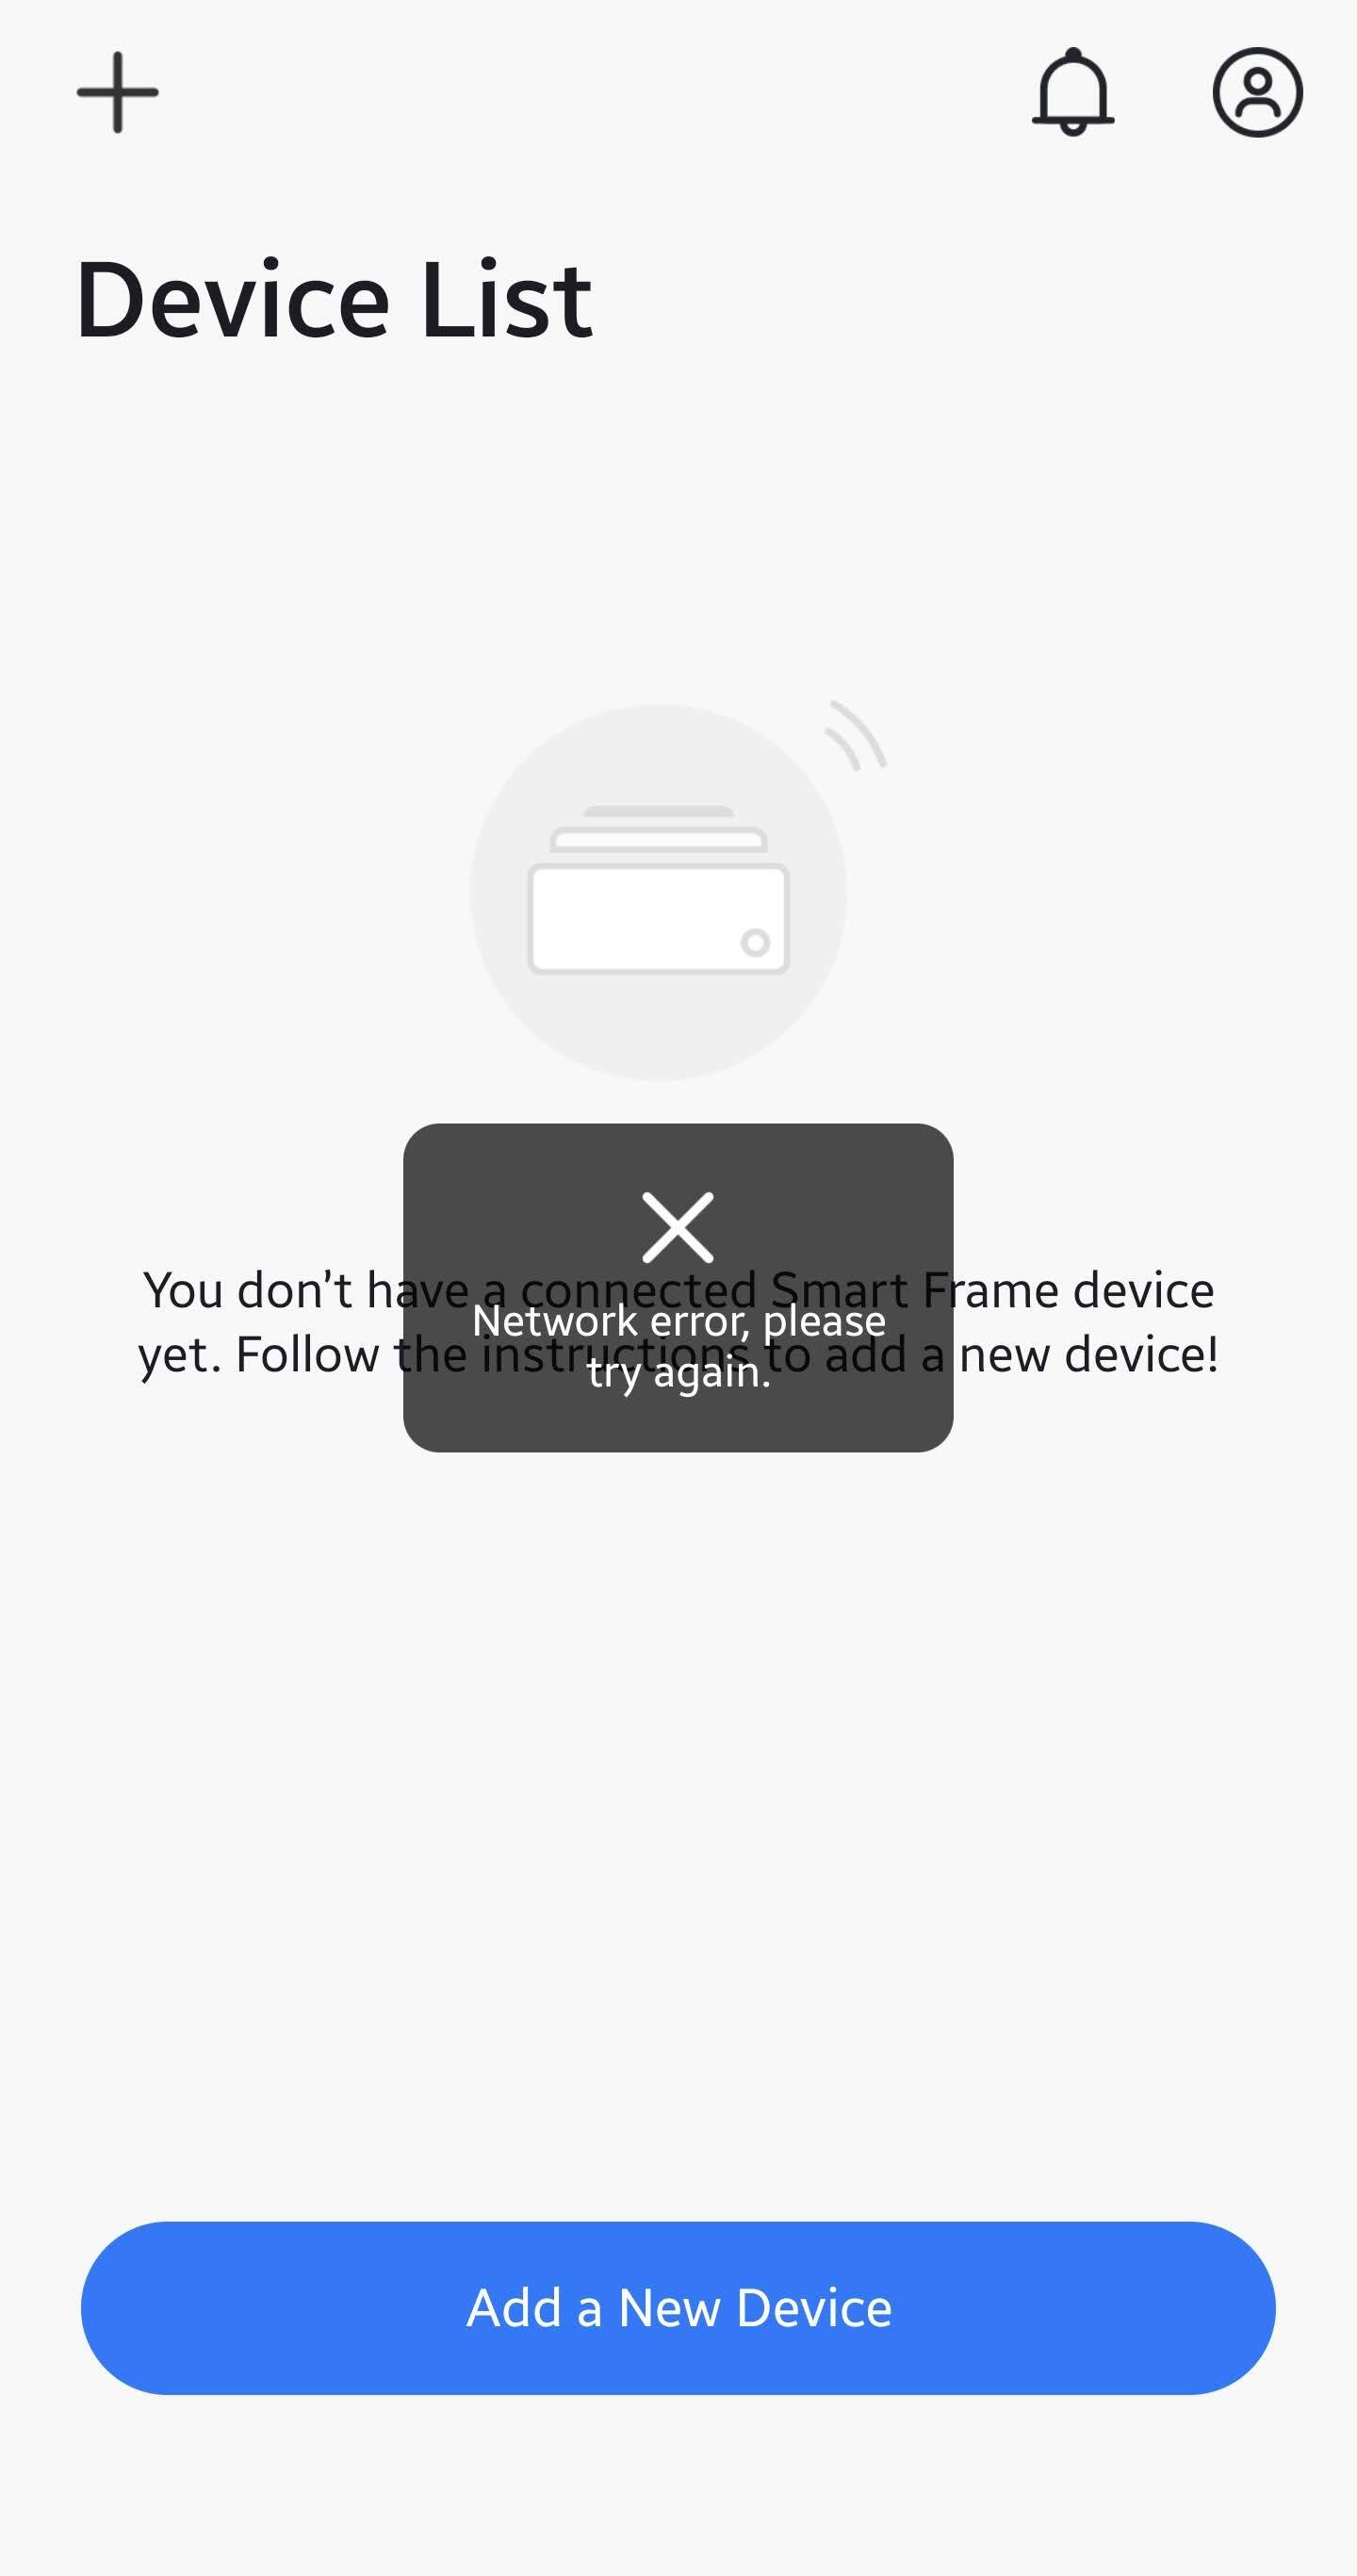 There-is-a-network-error-message-at-lenovo-smart-frame-app - English  Community - LENOVO COMMUNITY